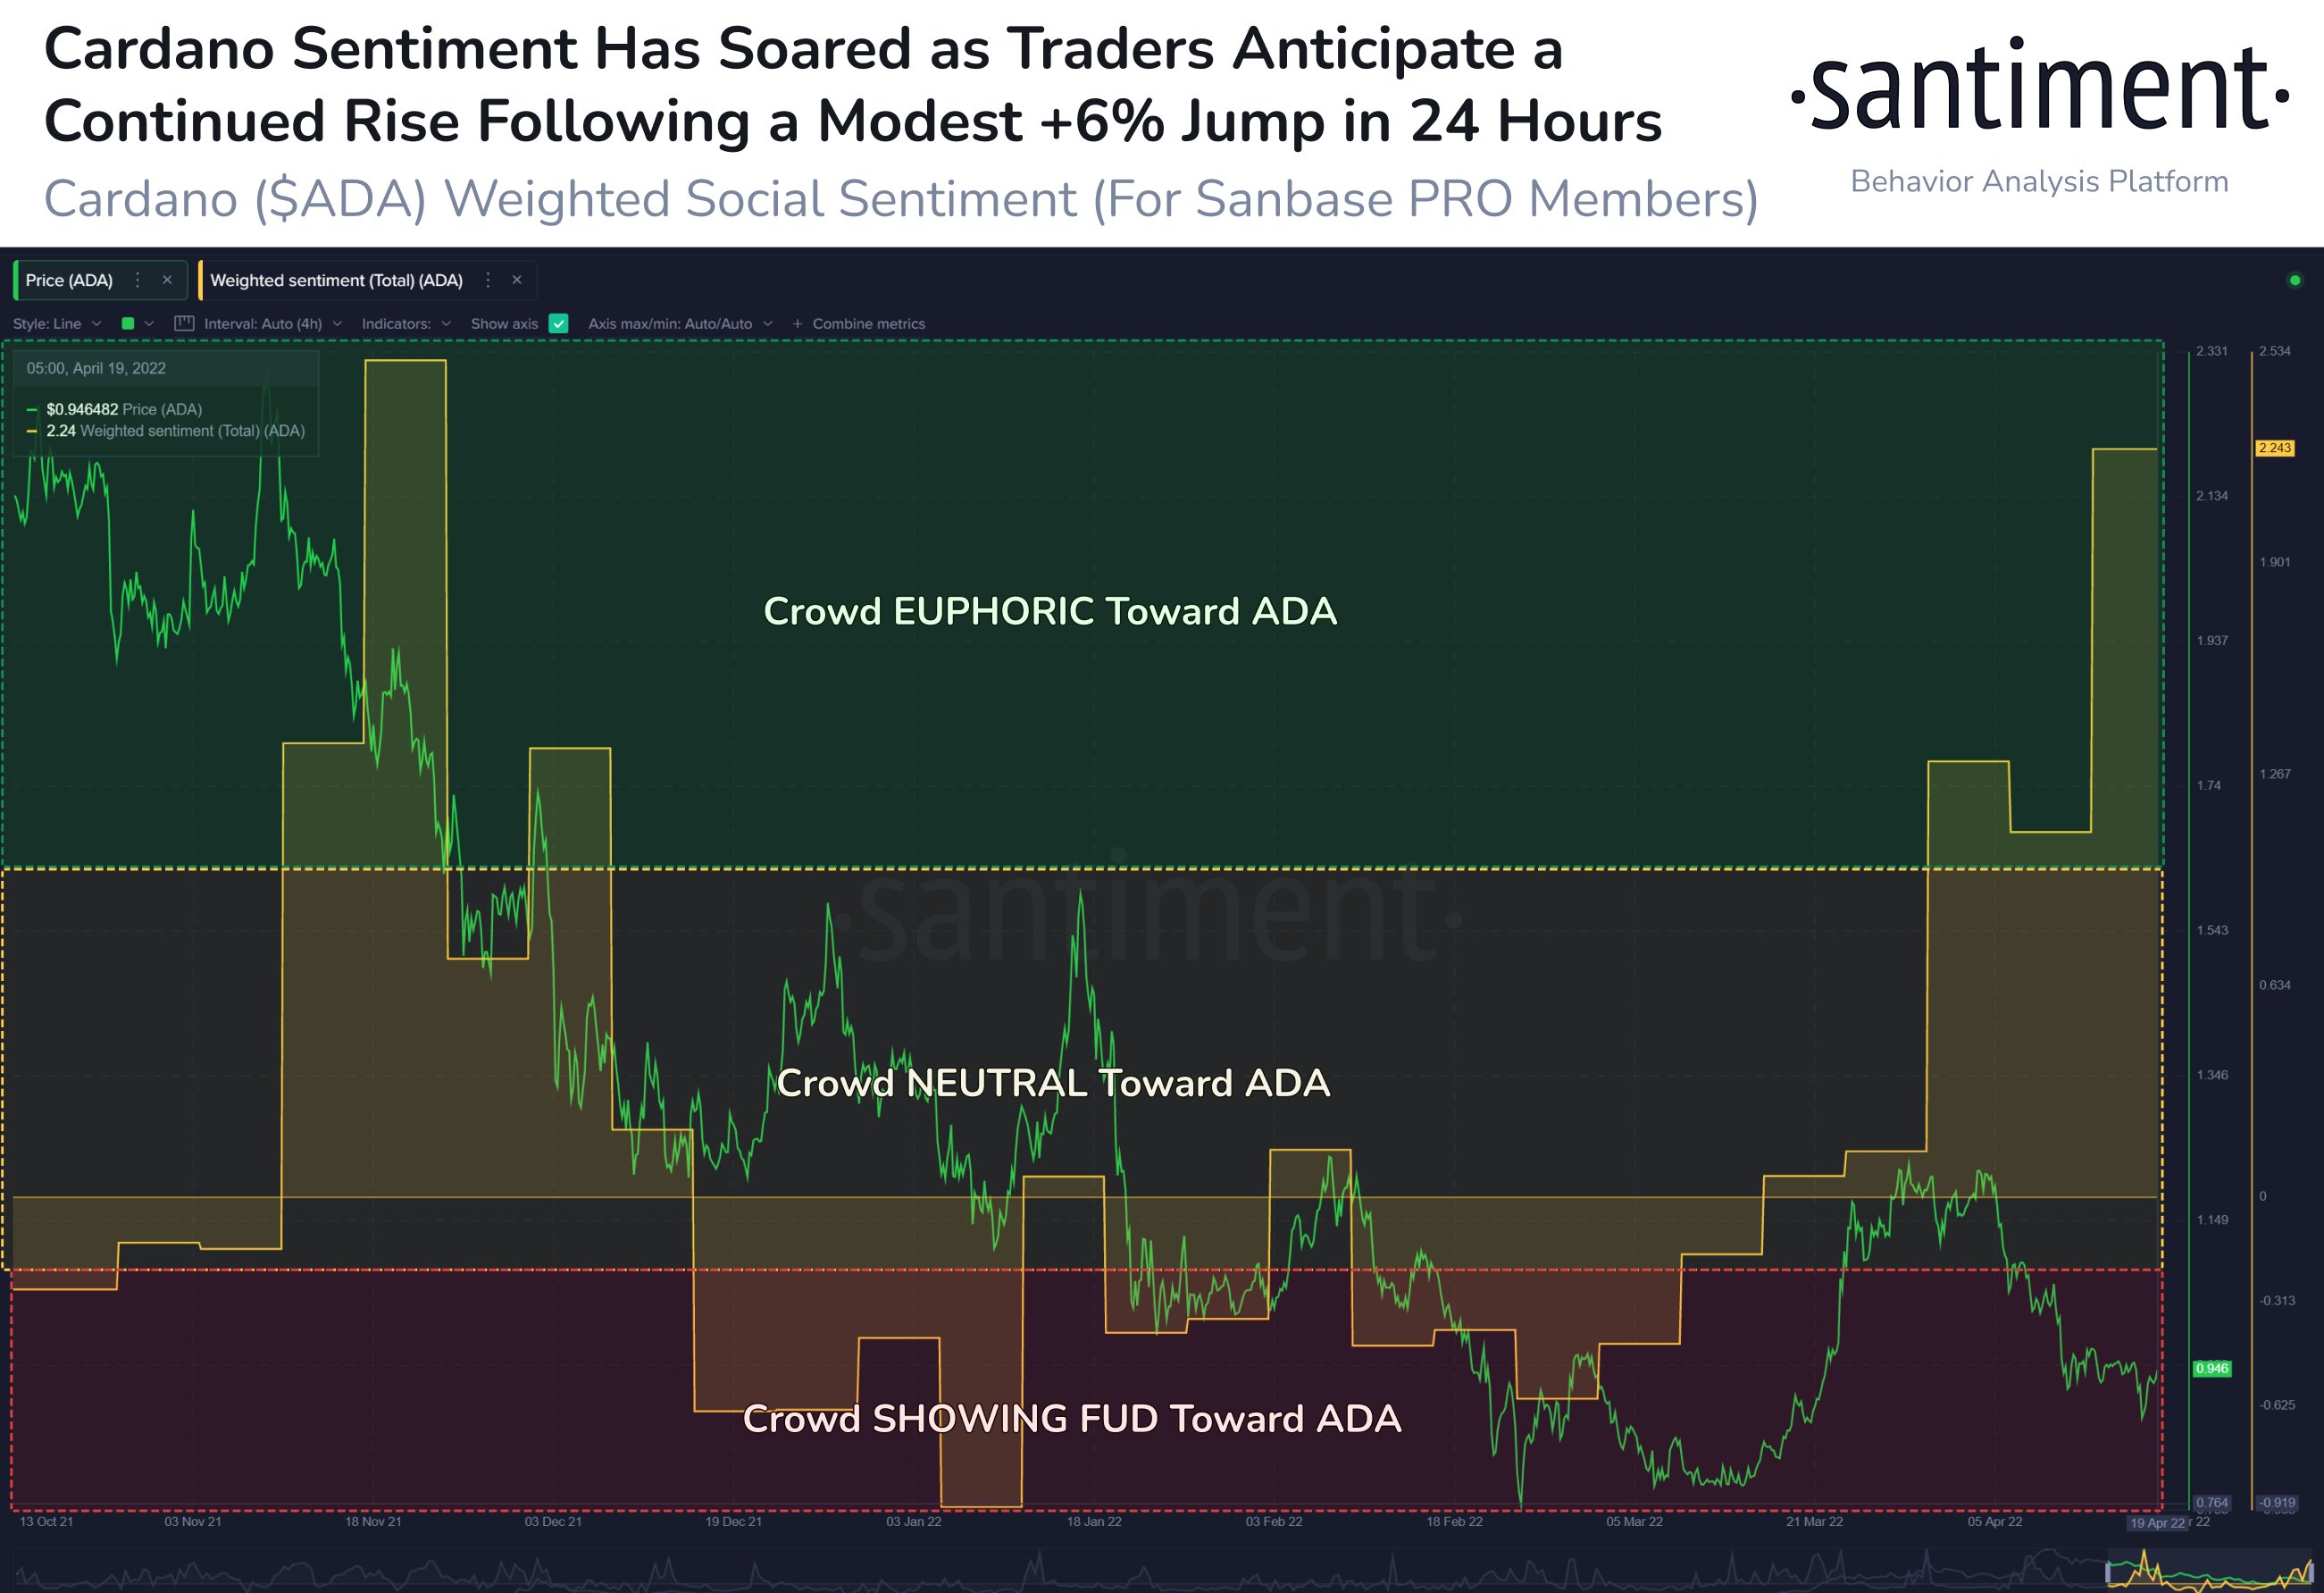 Is Cardano About To Break Out? Analytics Firm Says Traders Feel Confident About ADA